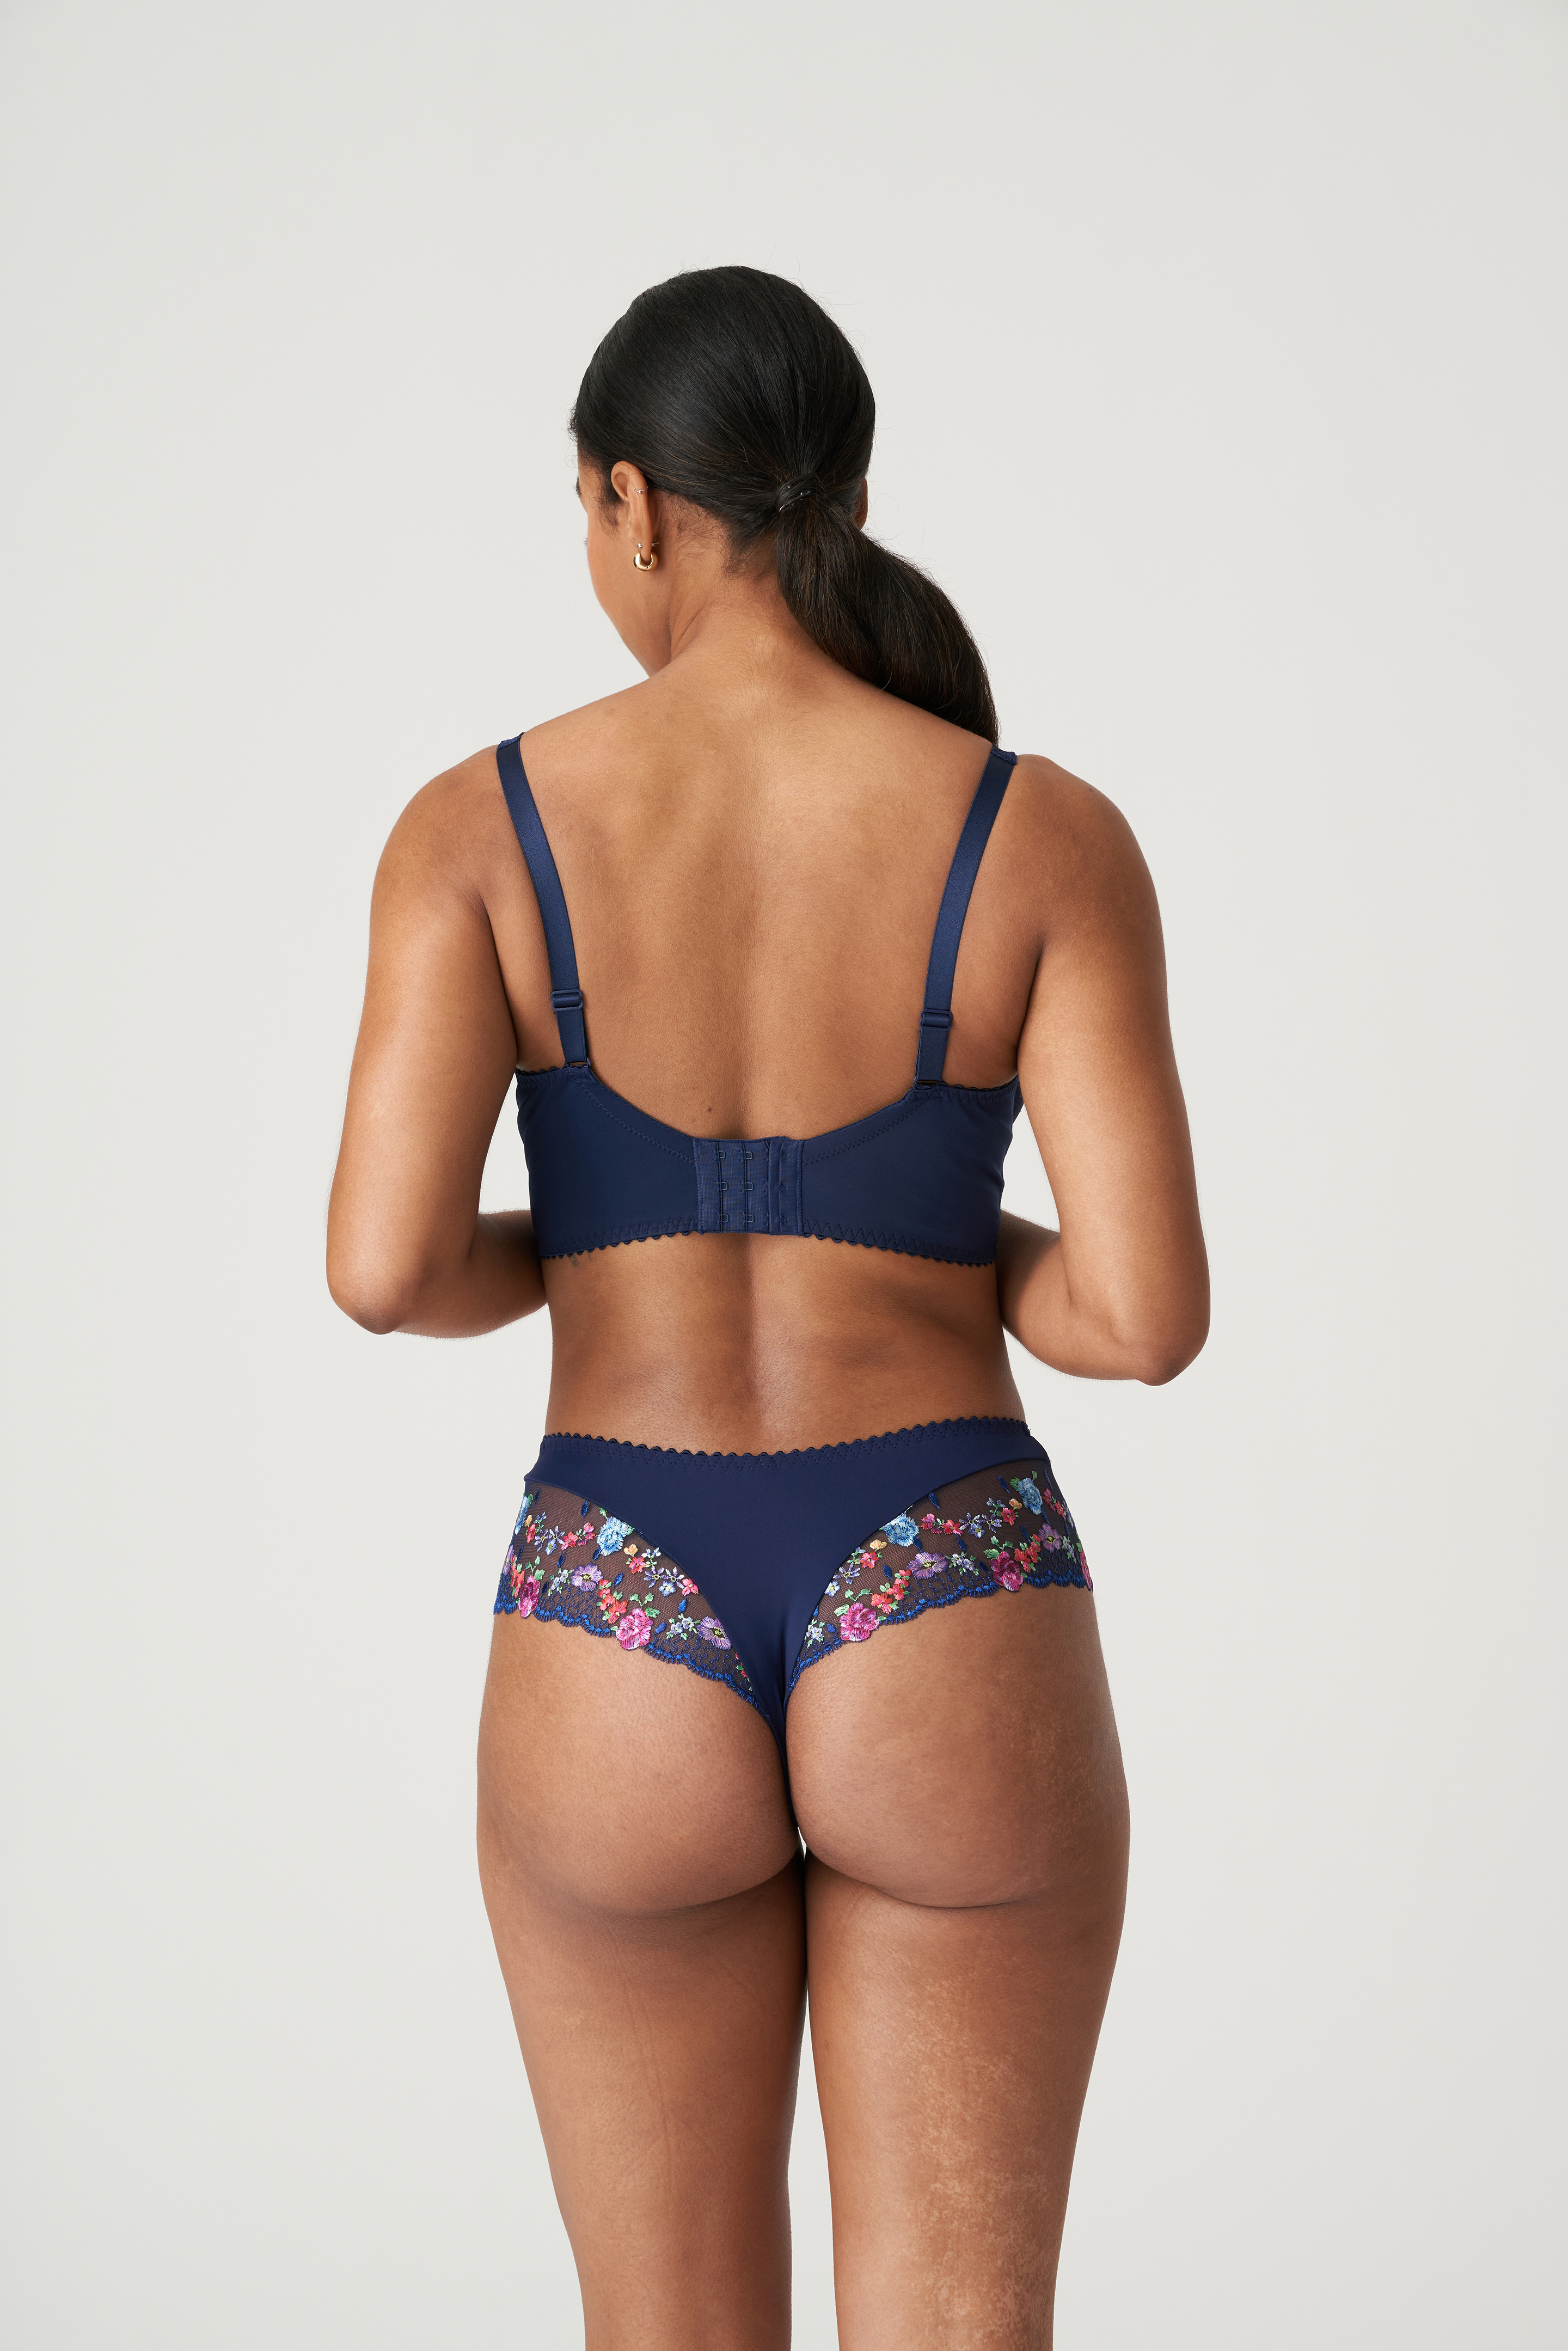 Luxury thong Sedaine Prima Donna couleur Water blue Blue tailles